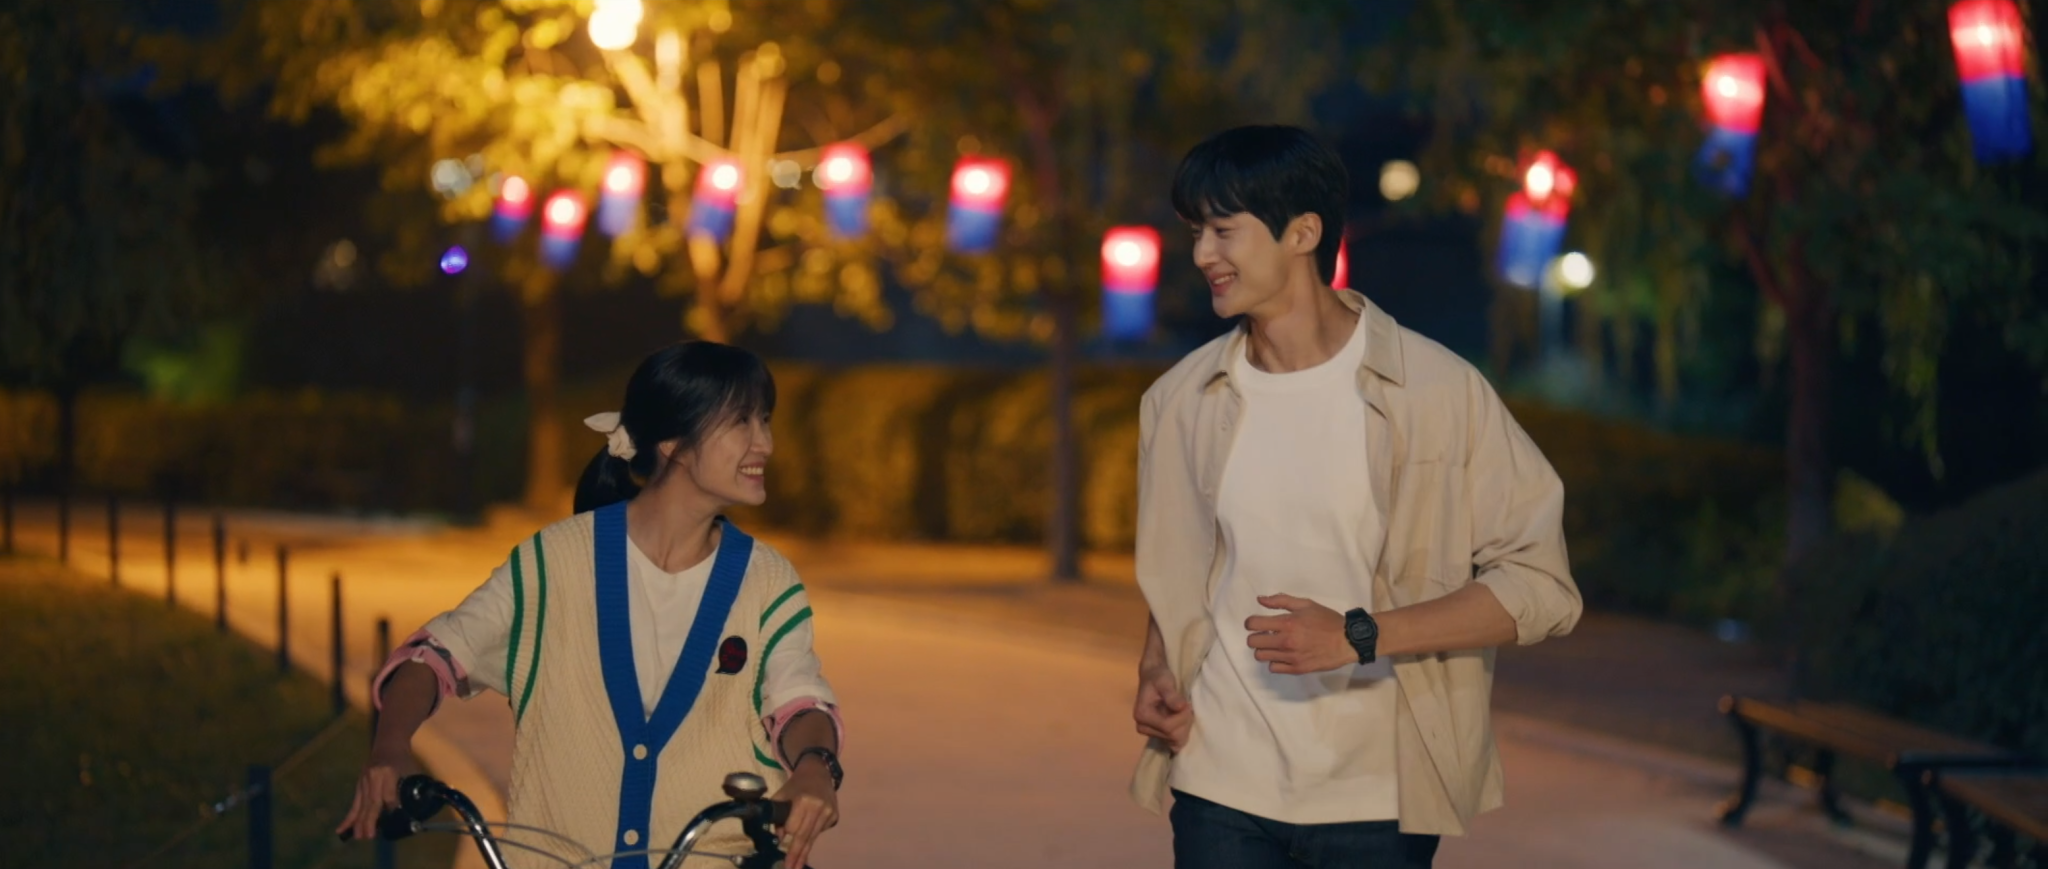 5 Times Byeon Woo Seok Tries To Get Closer To Kim Hye Yoon In Episodes 5-6 Of 